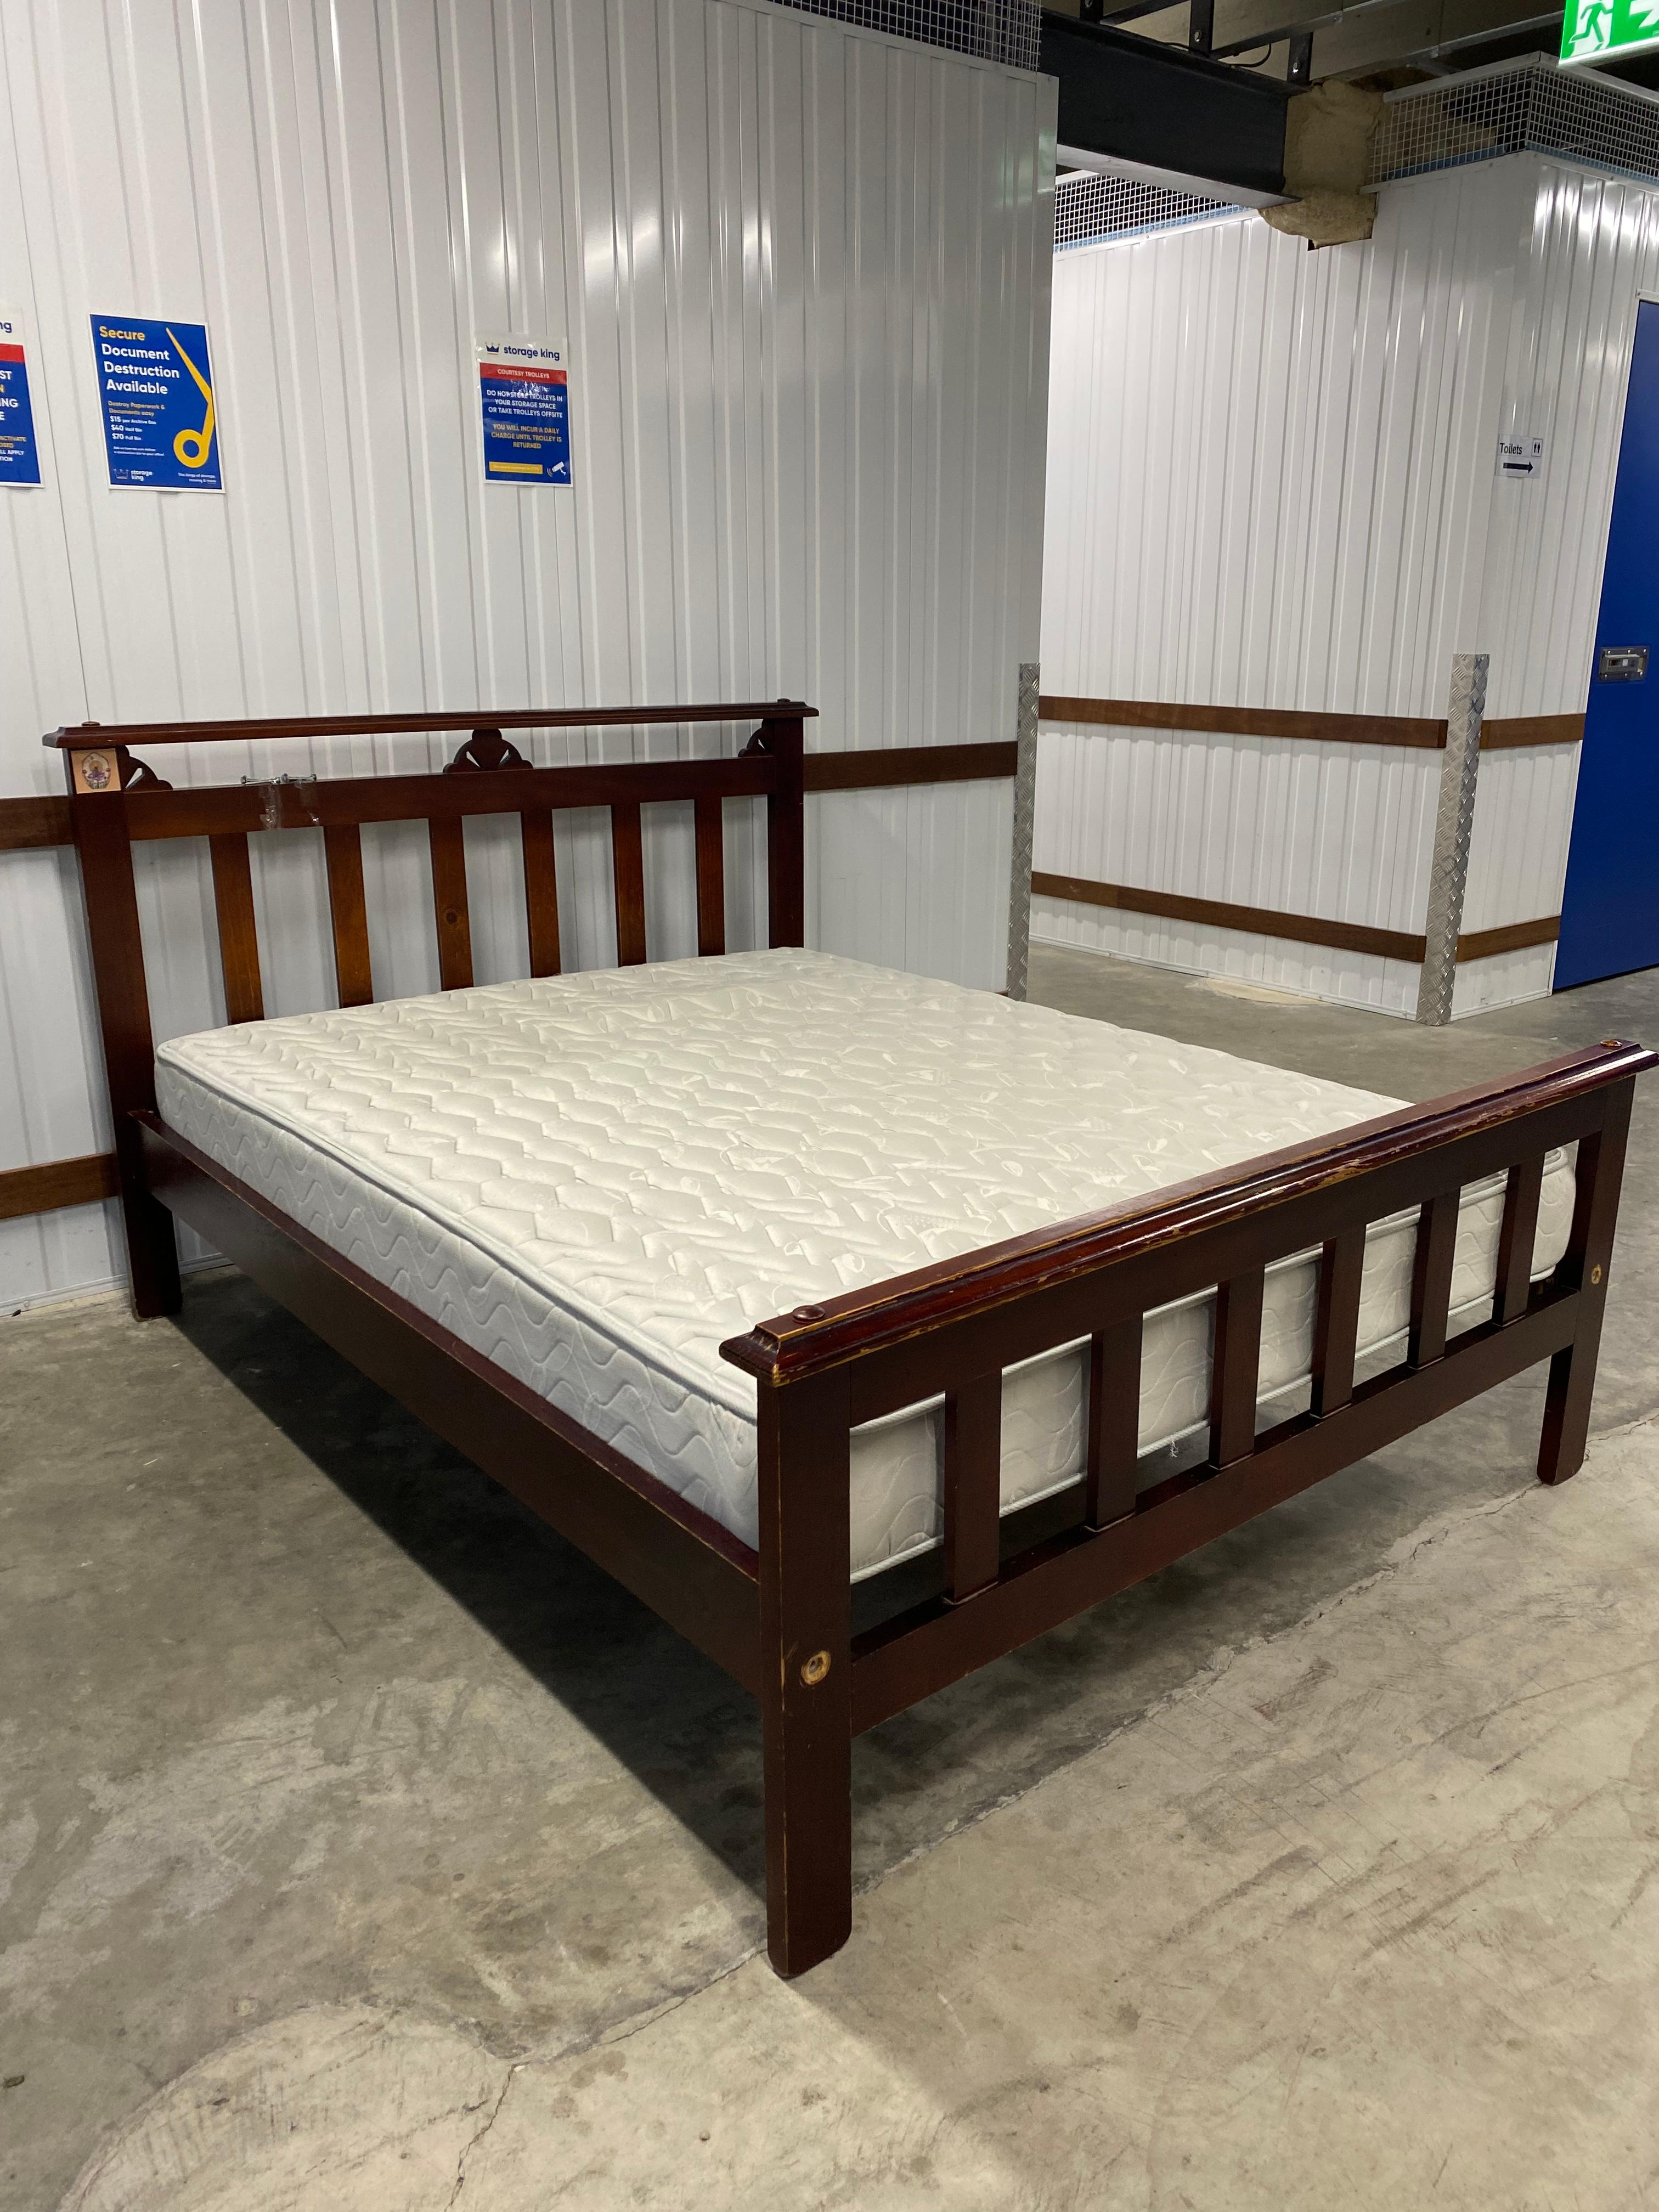 Queen Bed Frame Fair Condition and Mattress